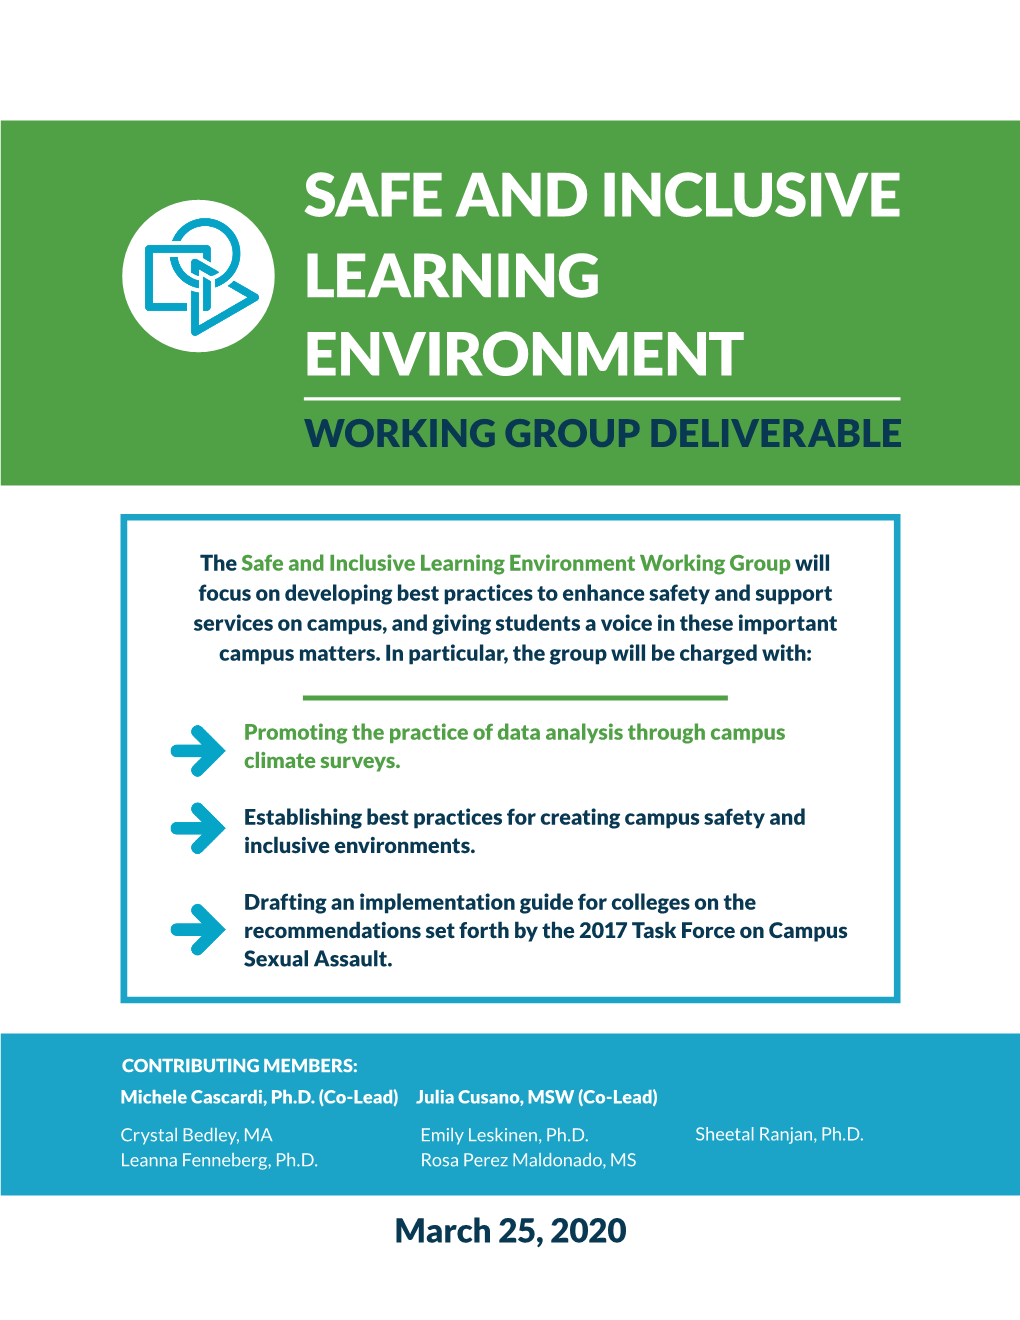 Safe and Inclusive Learning Environment Working Group Deliverable